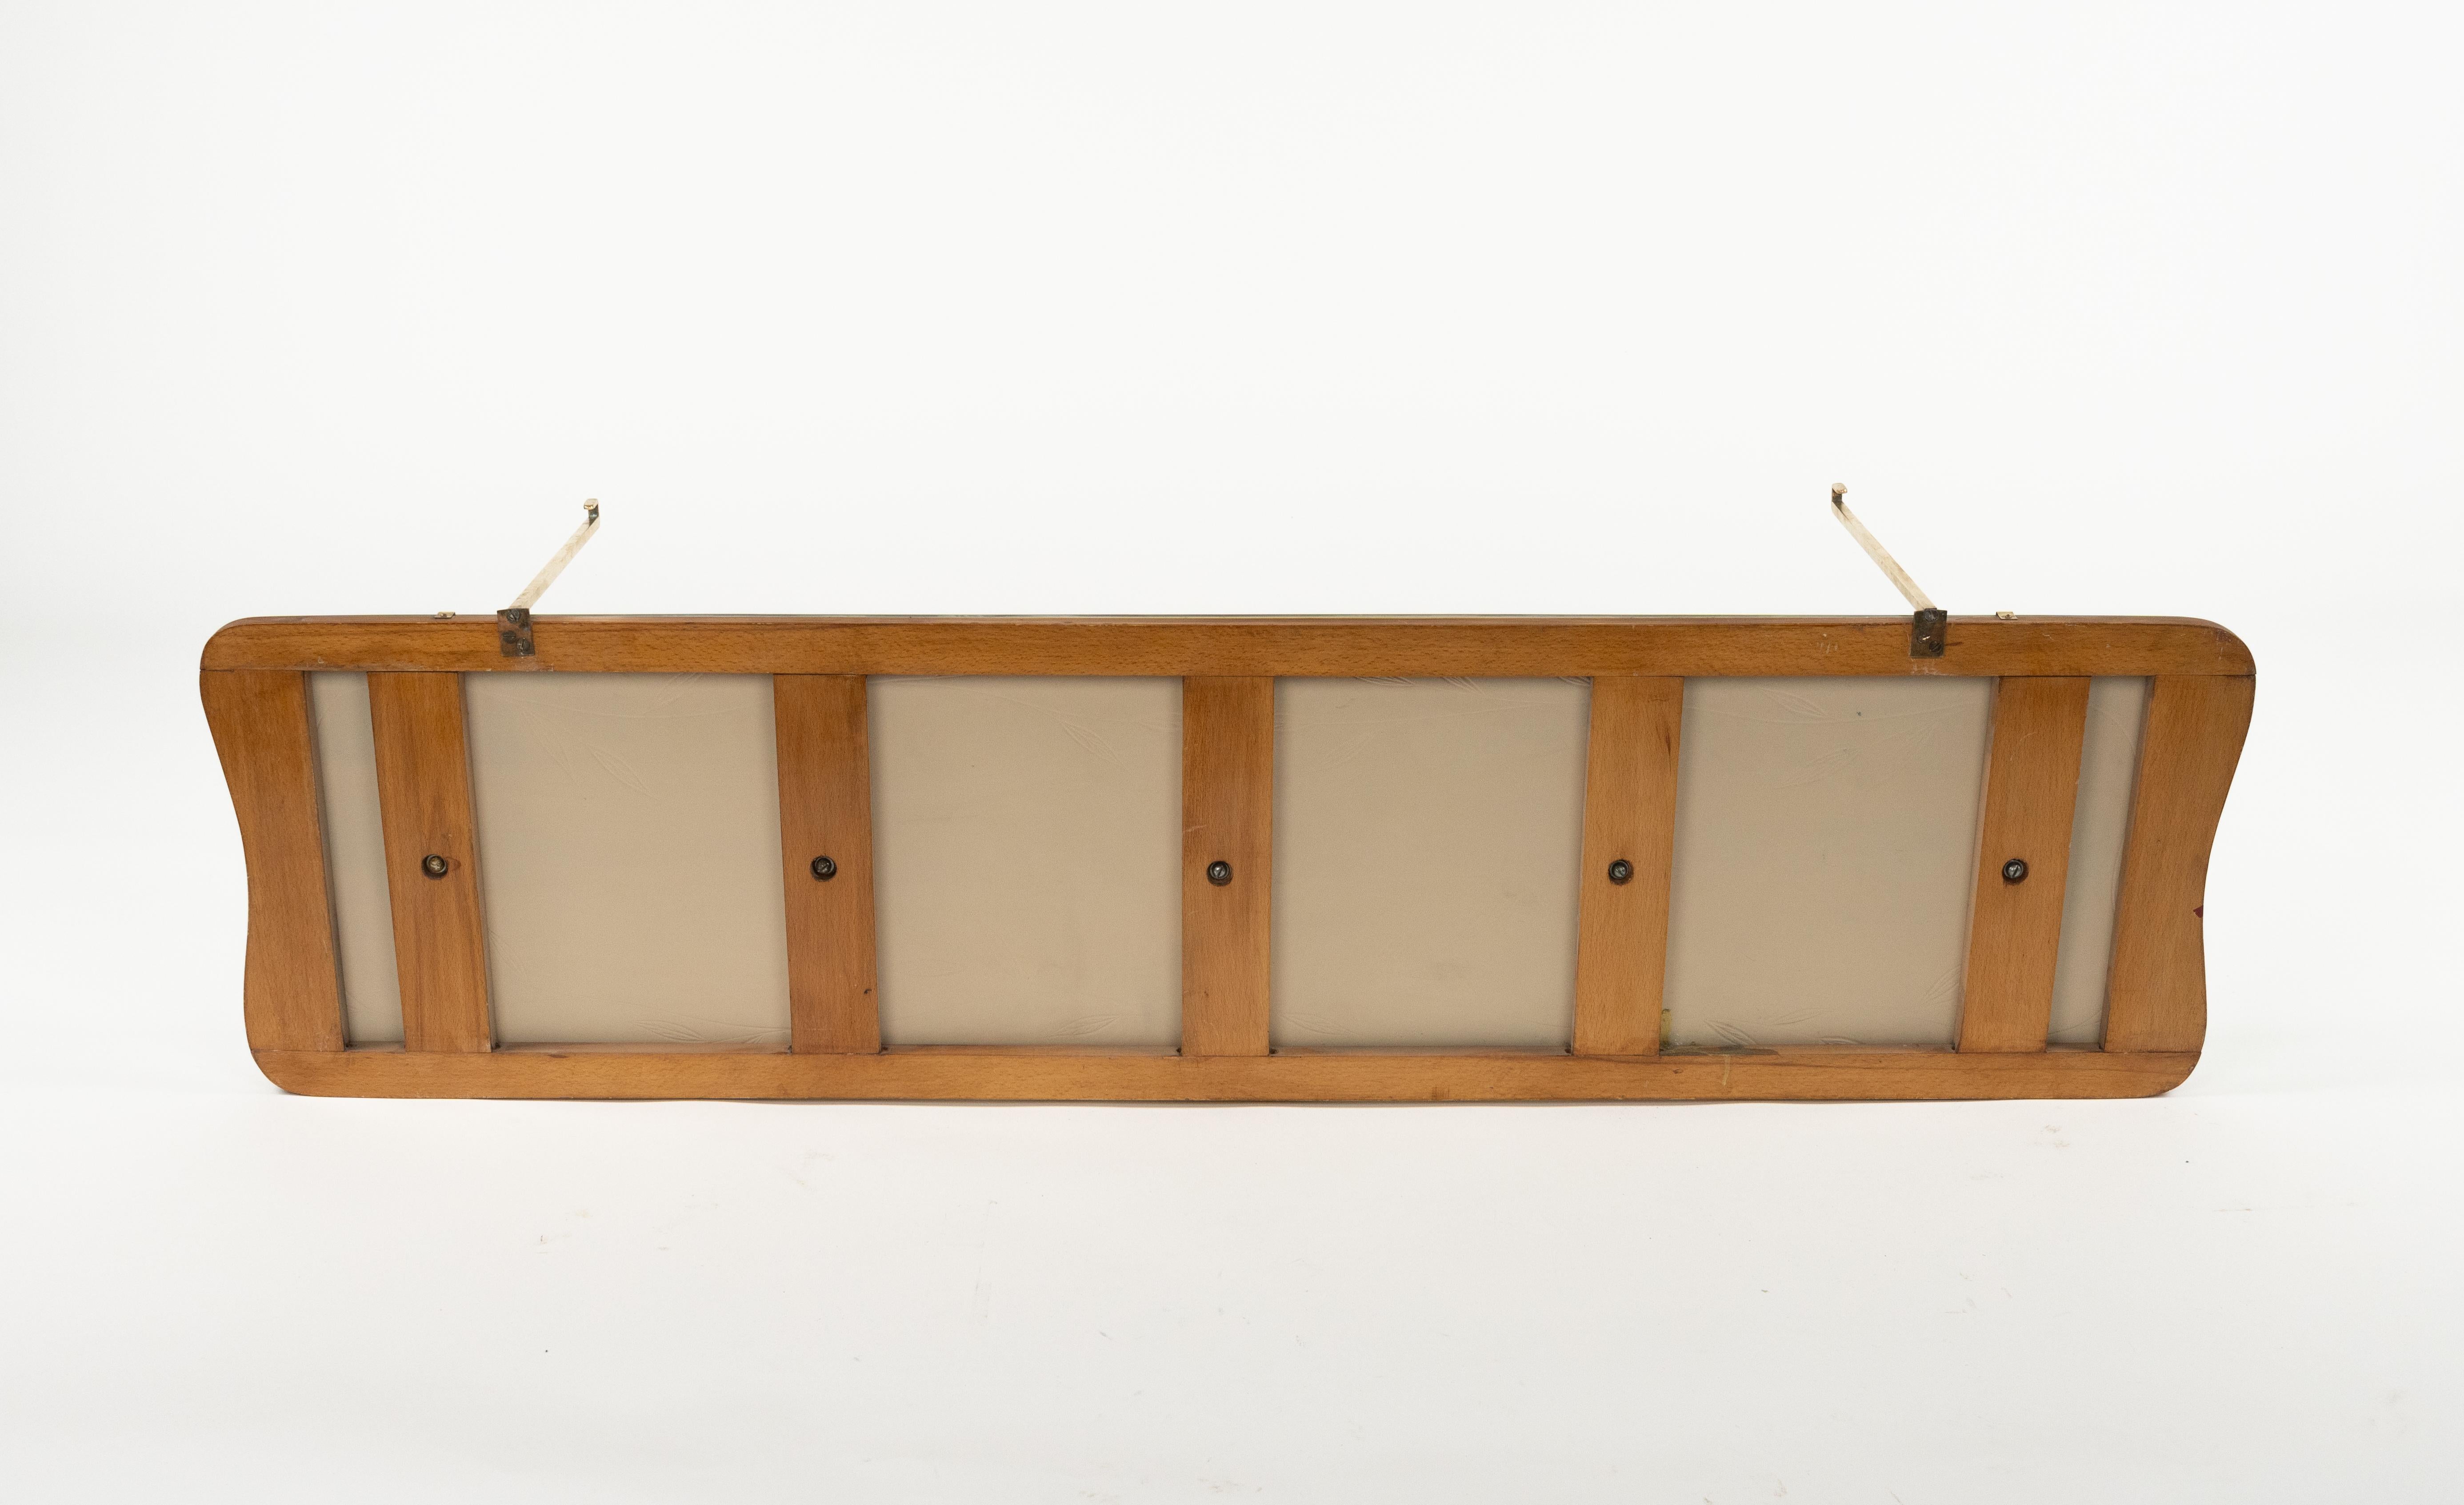 Midcentury Coat Rack Shelf in Mirror, Brass & Glass by Cristal Art, Italy, 1950s For Sale 11